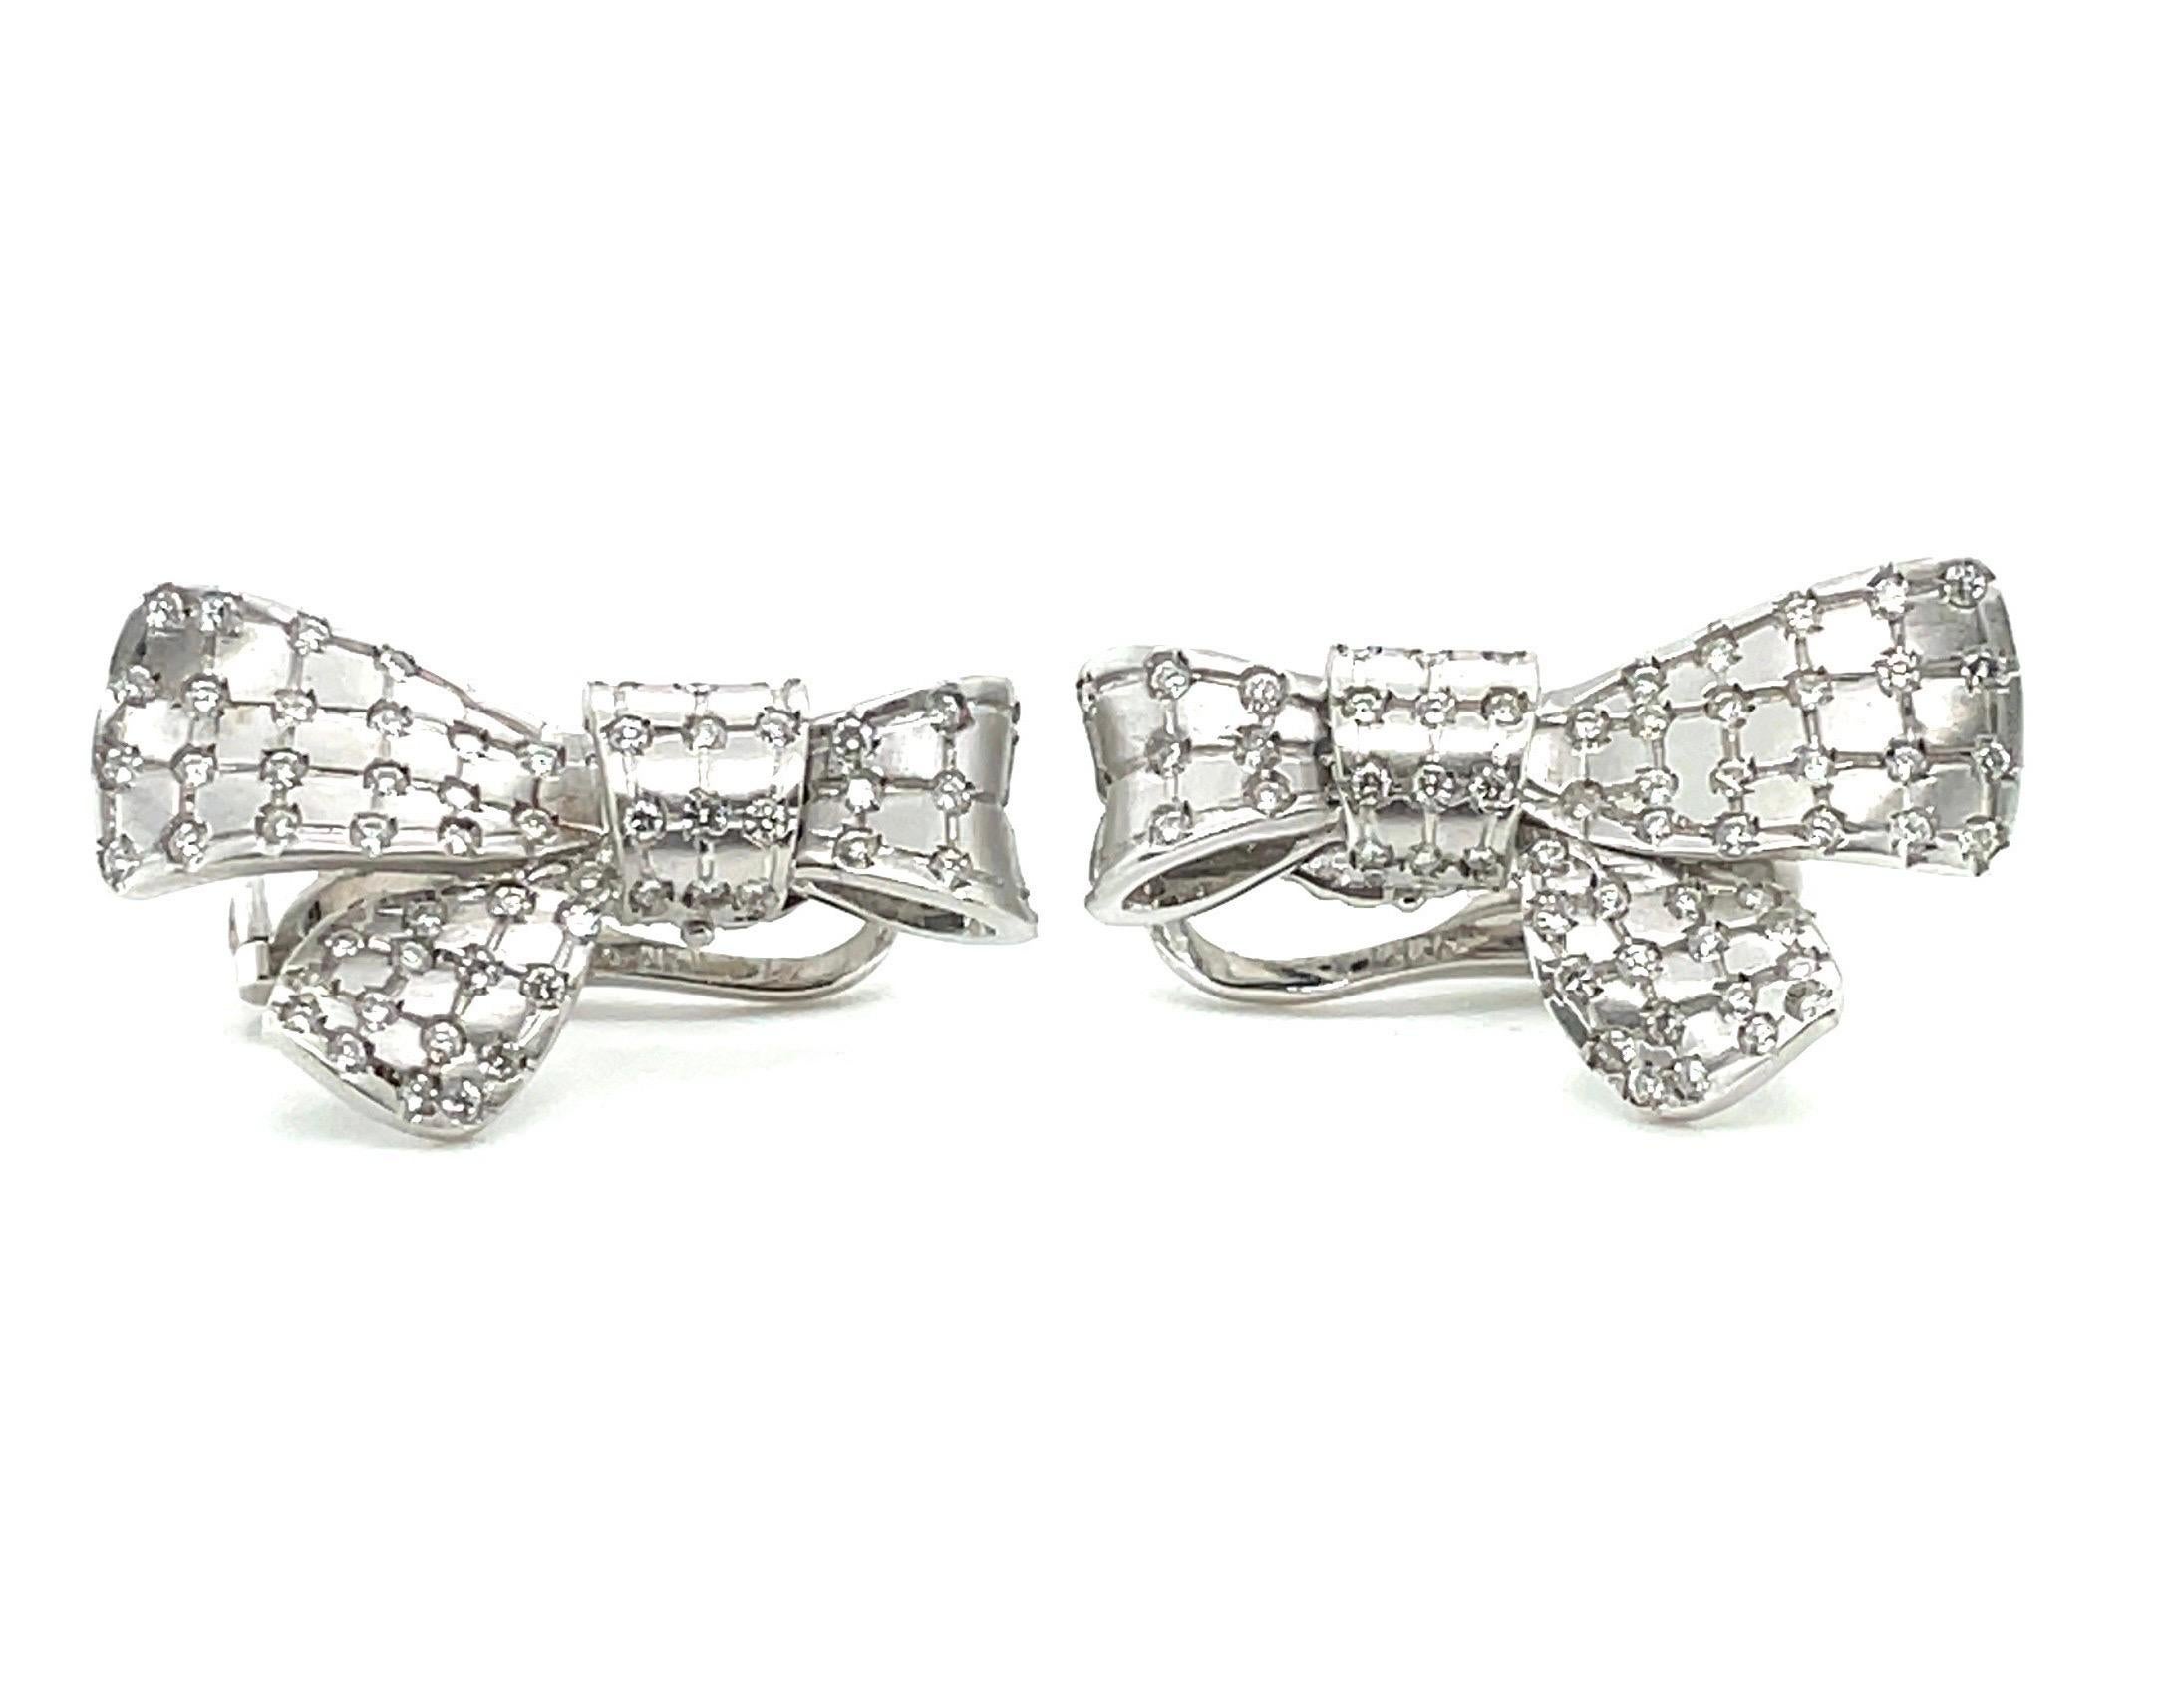 Attractive pair of 18 karat white gold and diamond ribbon bow earclips. 

Charming earclips crafted in 18 karat white gold, each designed as a sculpted ribbon bow with matte-finish, checkered surface and decorated with 134 brilliant-cut diamonds